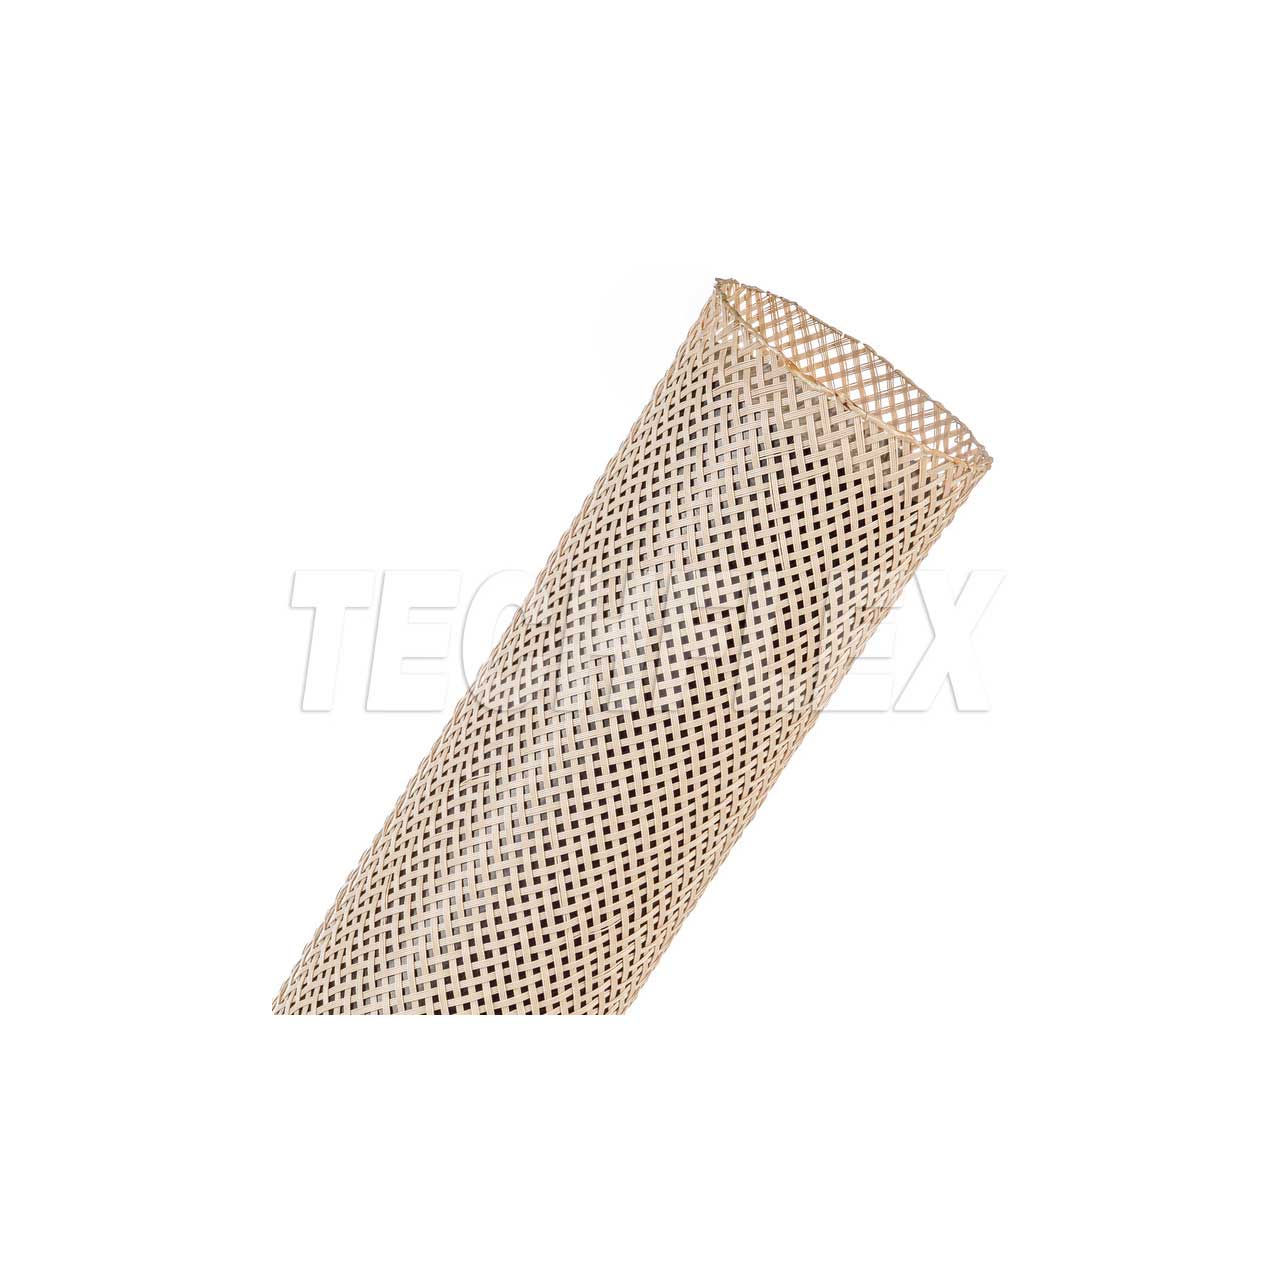 Techflex PTN1.50 200 Expandable Braided Sleeving - 1 Inch to 2 1/8 Inch - Beige - 200 Foot